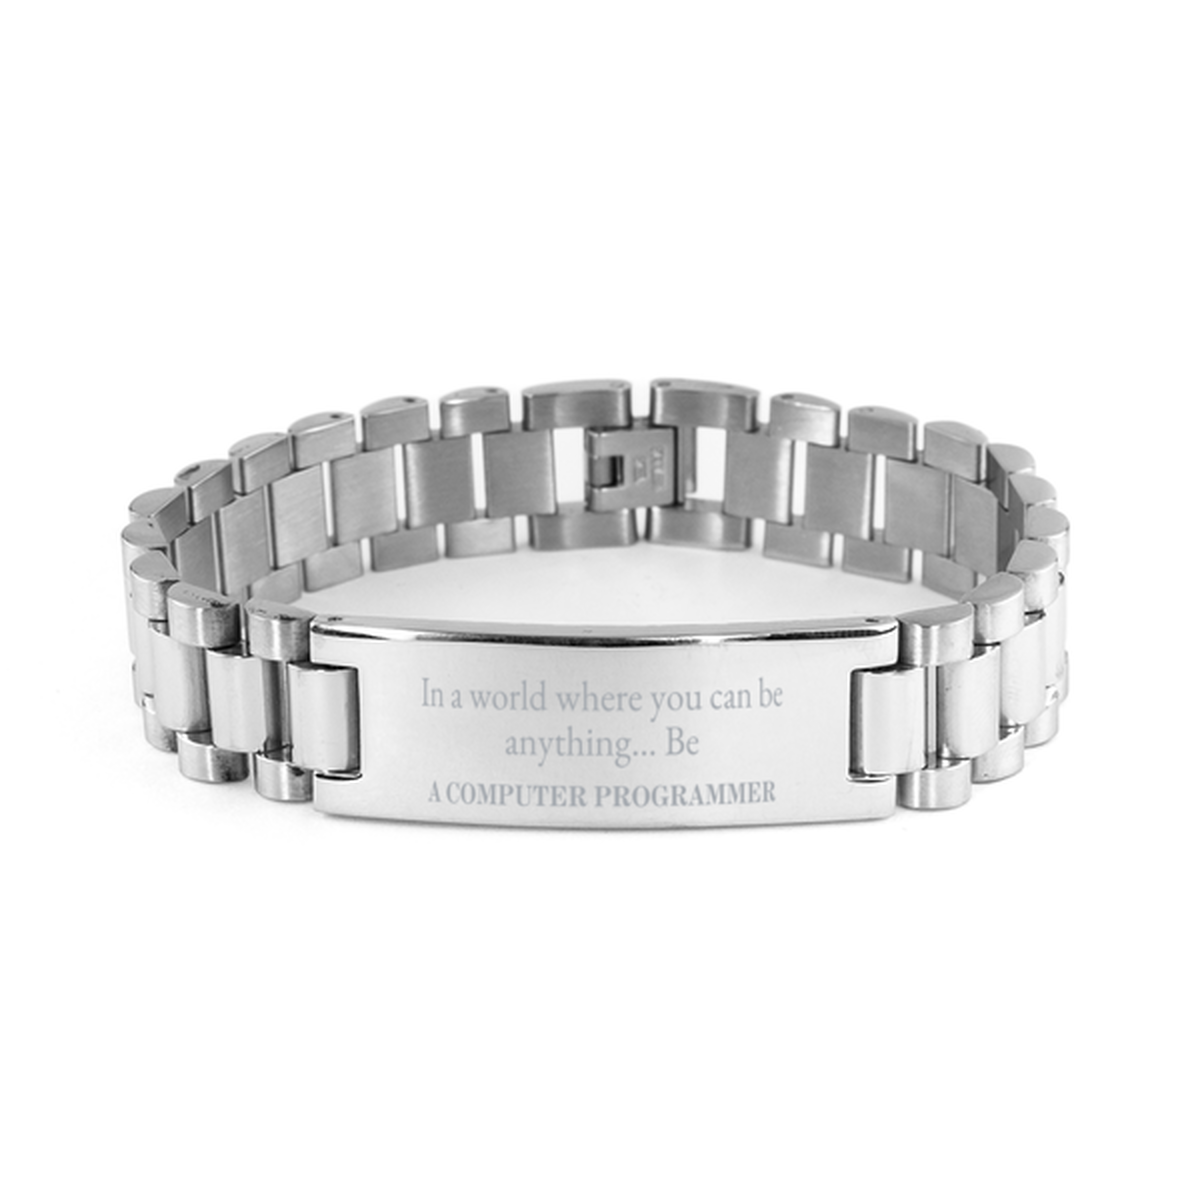 Gifts for Computer Programmer, In a world where you can be anything, Appreciation Birthday Ladder Stainless Steel Bracelet for Men, Women, Friends, Coworkers